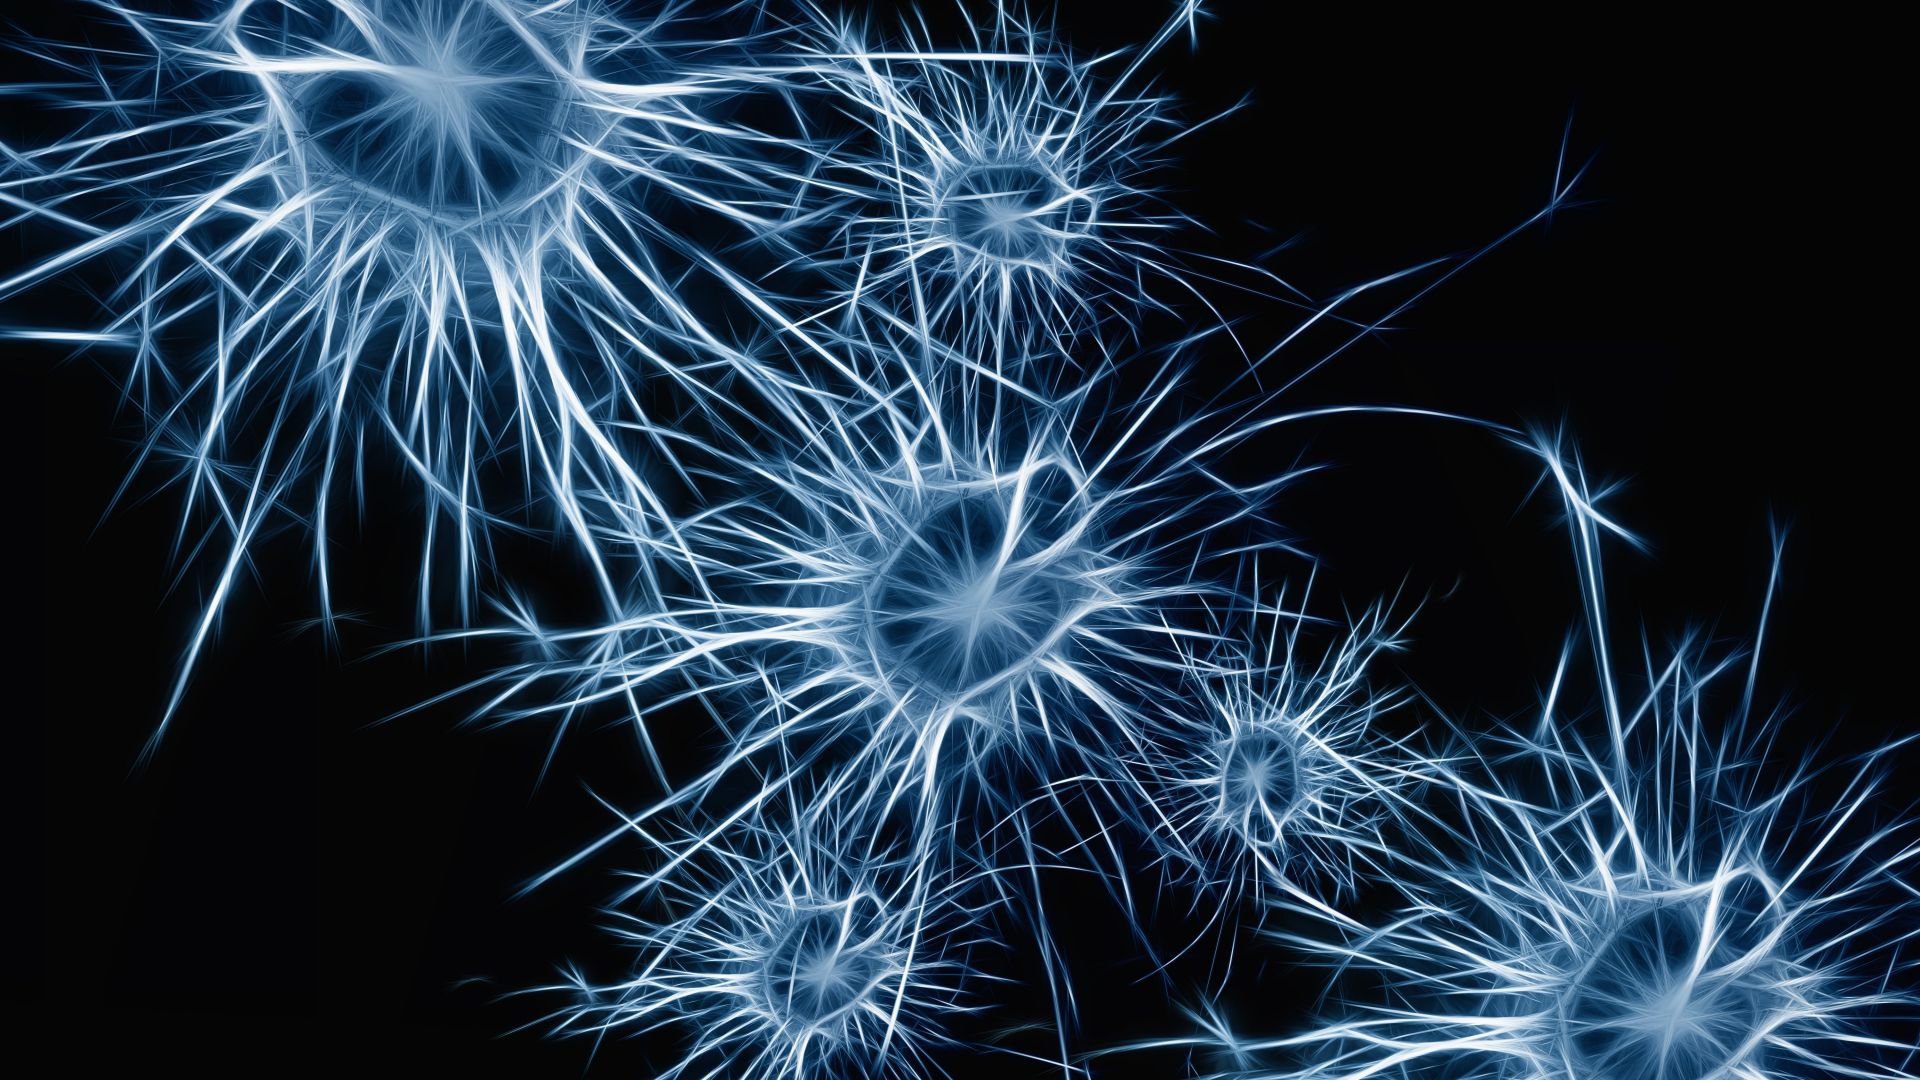 Wallpaper Neurons cell structure